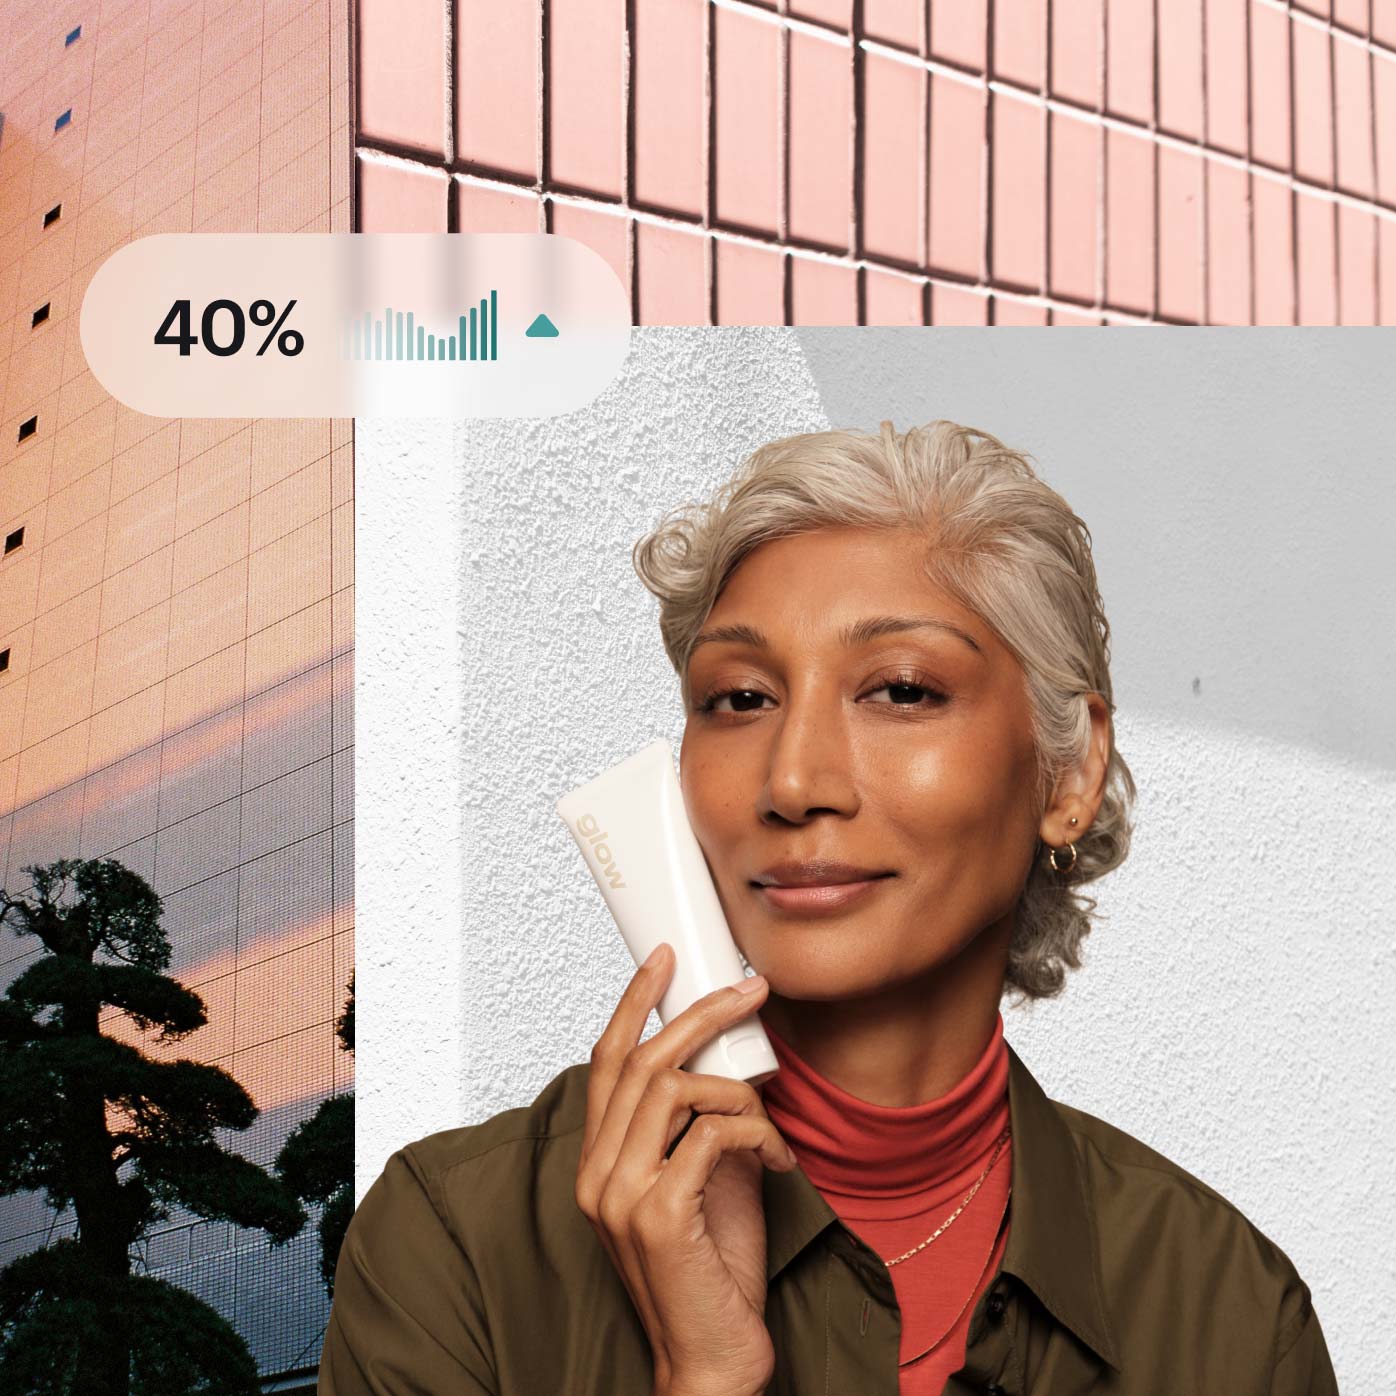 Photo collage. In the foreground, a close up of a merchant from the shoulders up, smiling in a relaxed and confident way, looking into the camera and holding a small white tube of skincare product next to their cheek. A small graphic shows a chart with upward trajectory next to 40%. The background photo features a tall window-covered building reflecting a pink sunset, with one dark tree in the foreground.